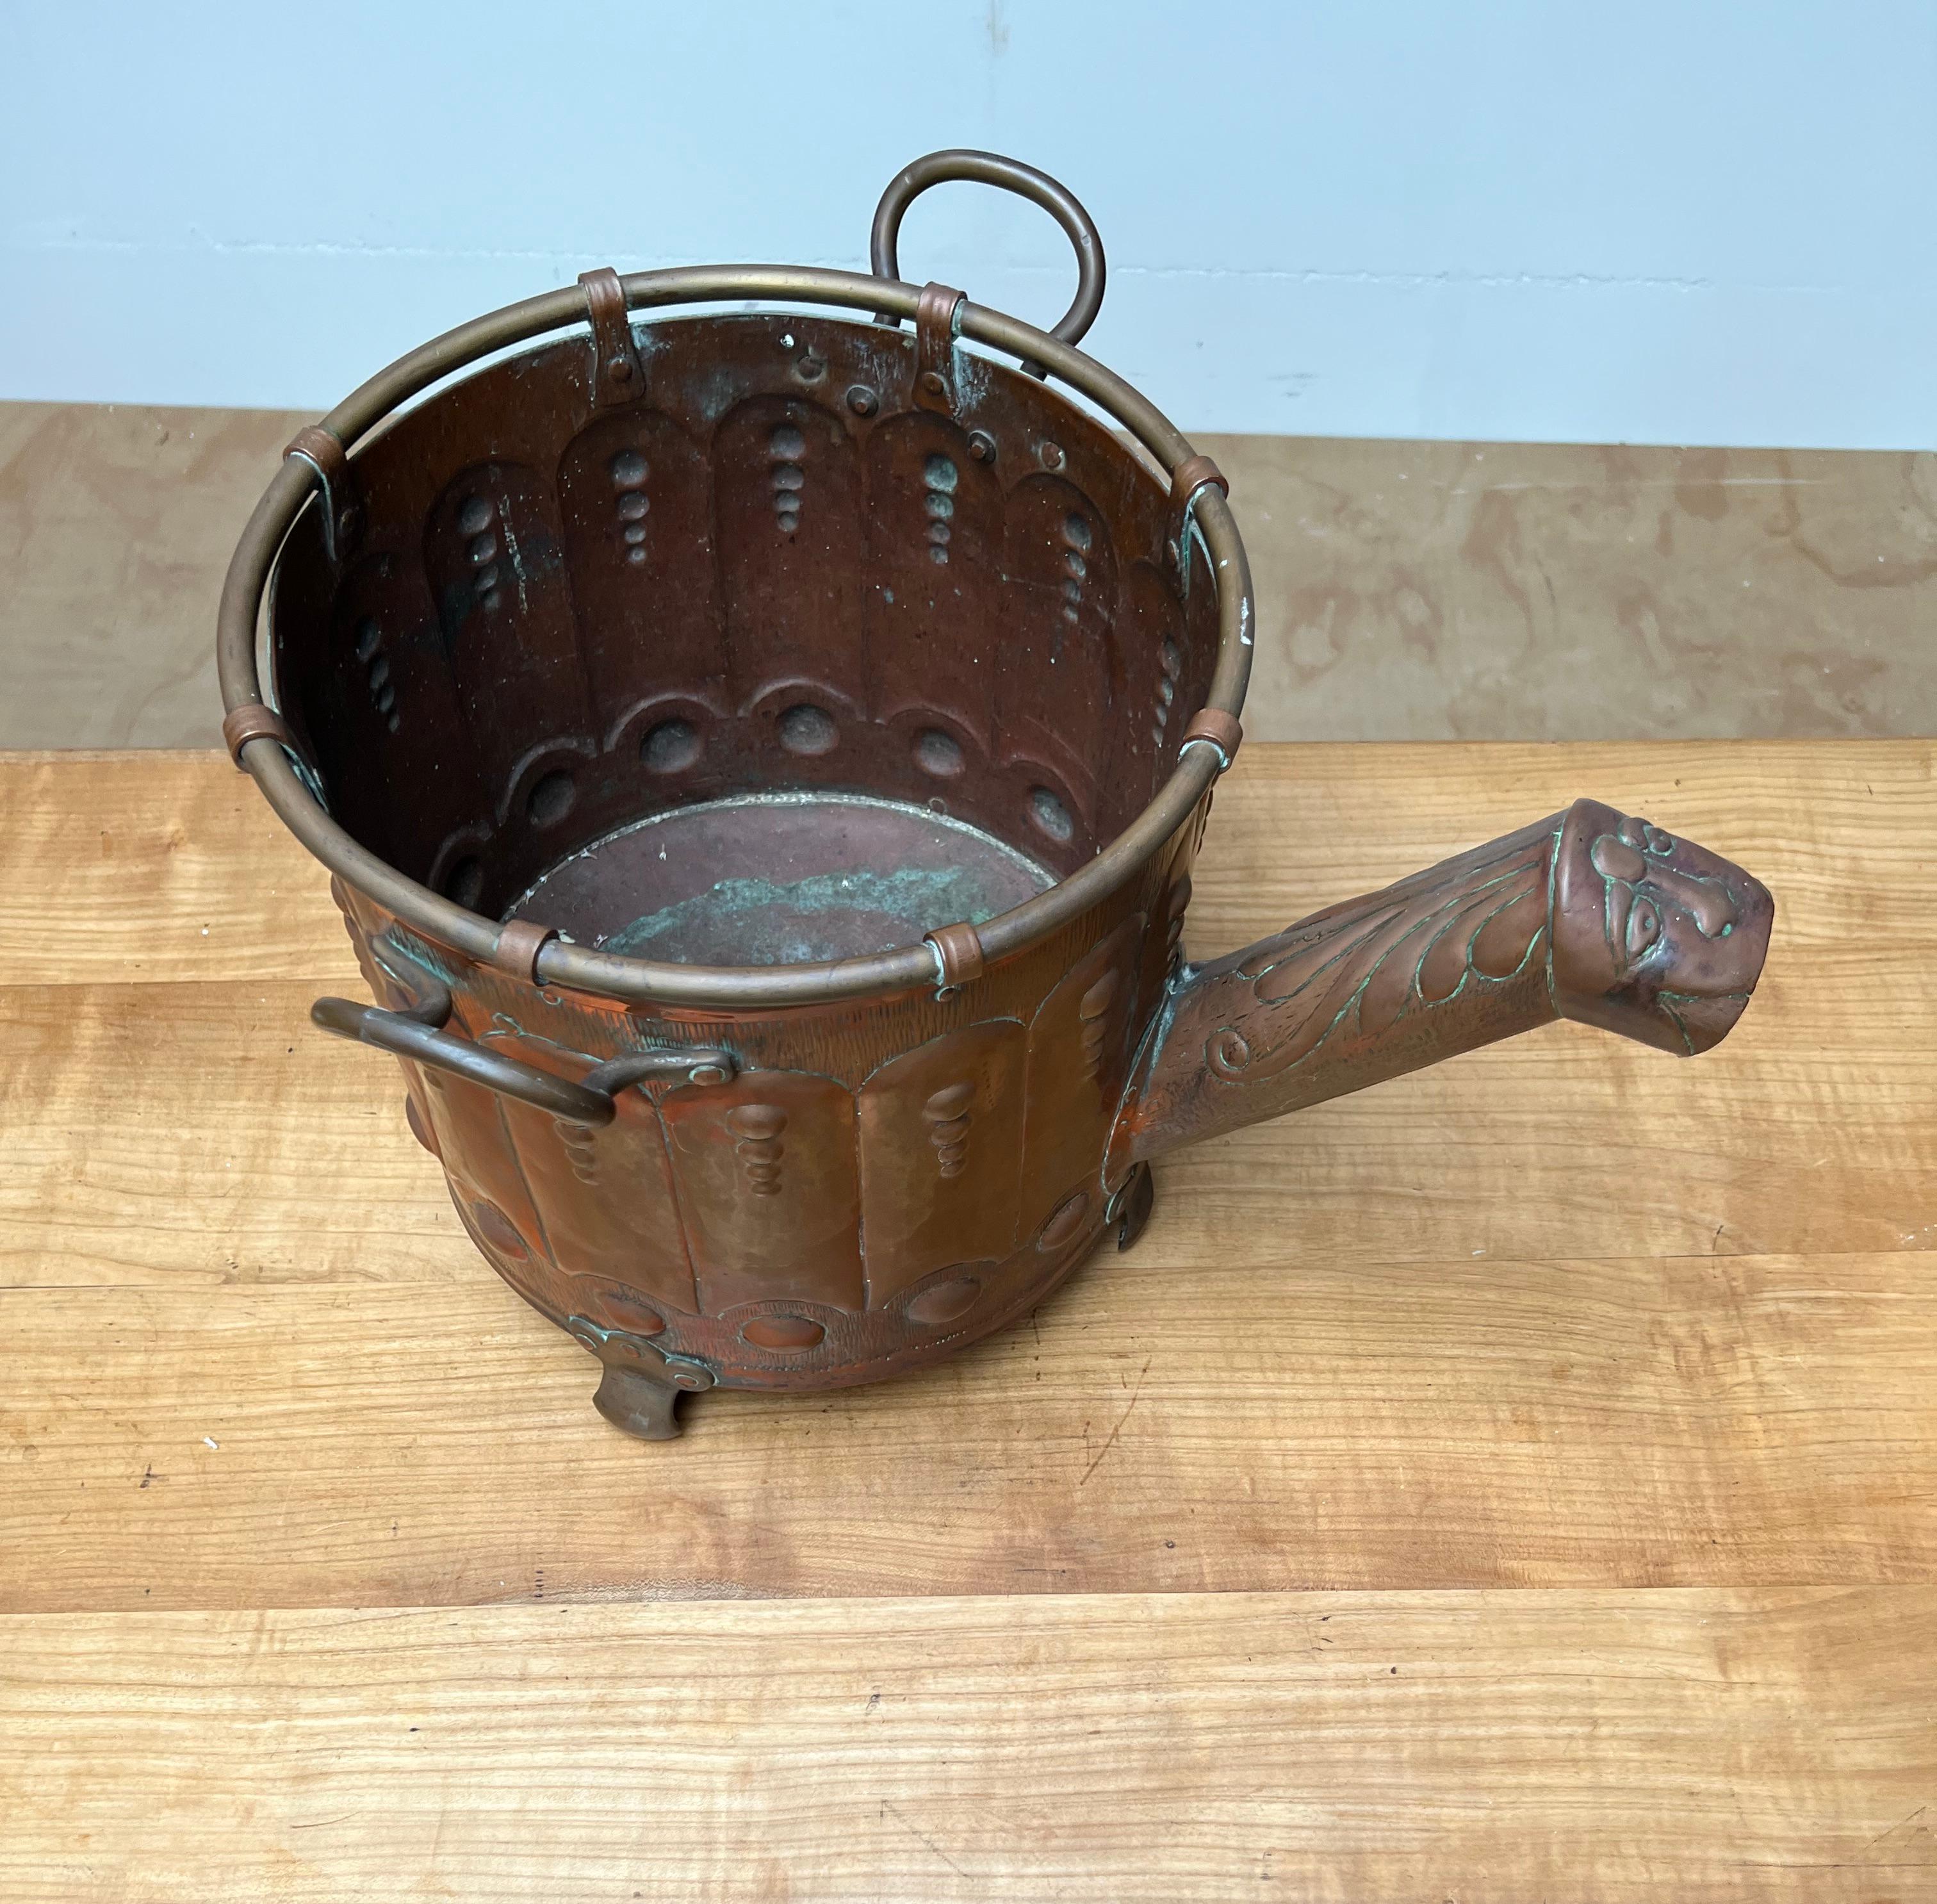 Sizeable and museum quality, embossed copper with brass handles bucket on feet.

This stunning, sturdy and heavy antique and hand-crafted bucket is another one of our recent rare finds. When used as a log bucket, this handcrafted antique can single